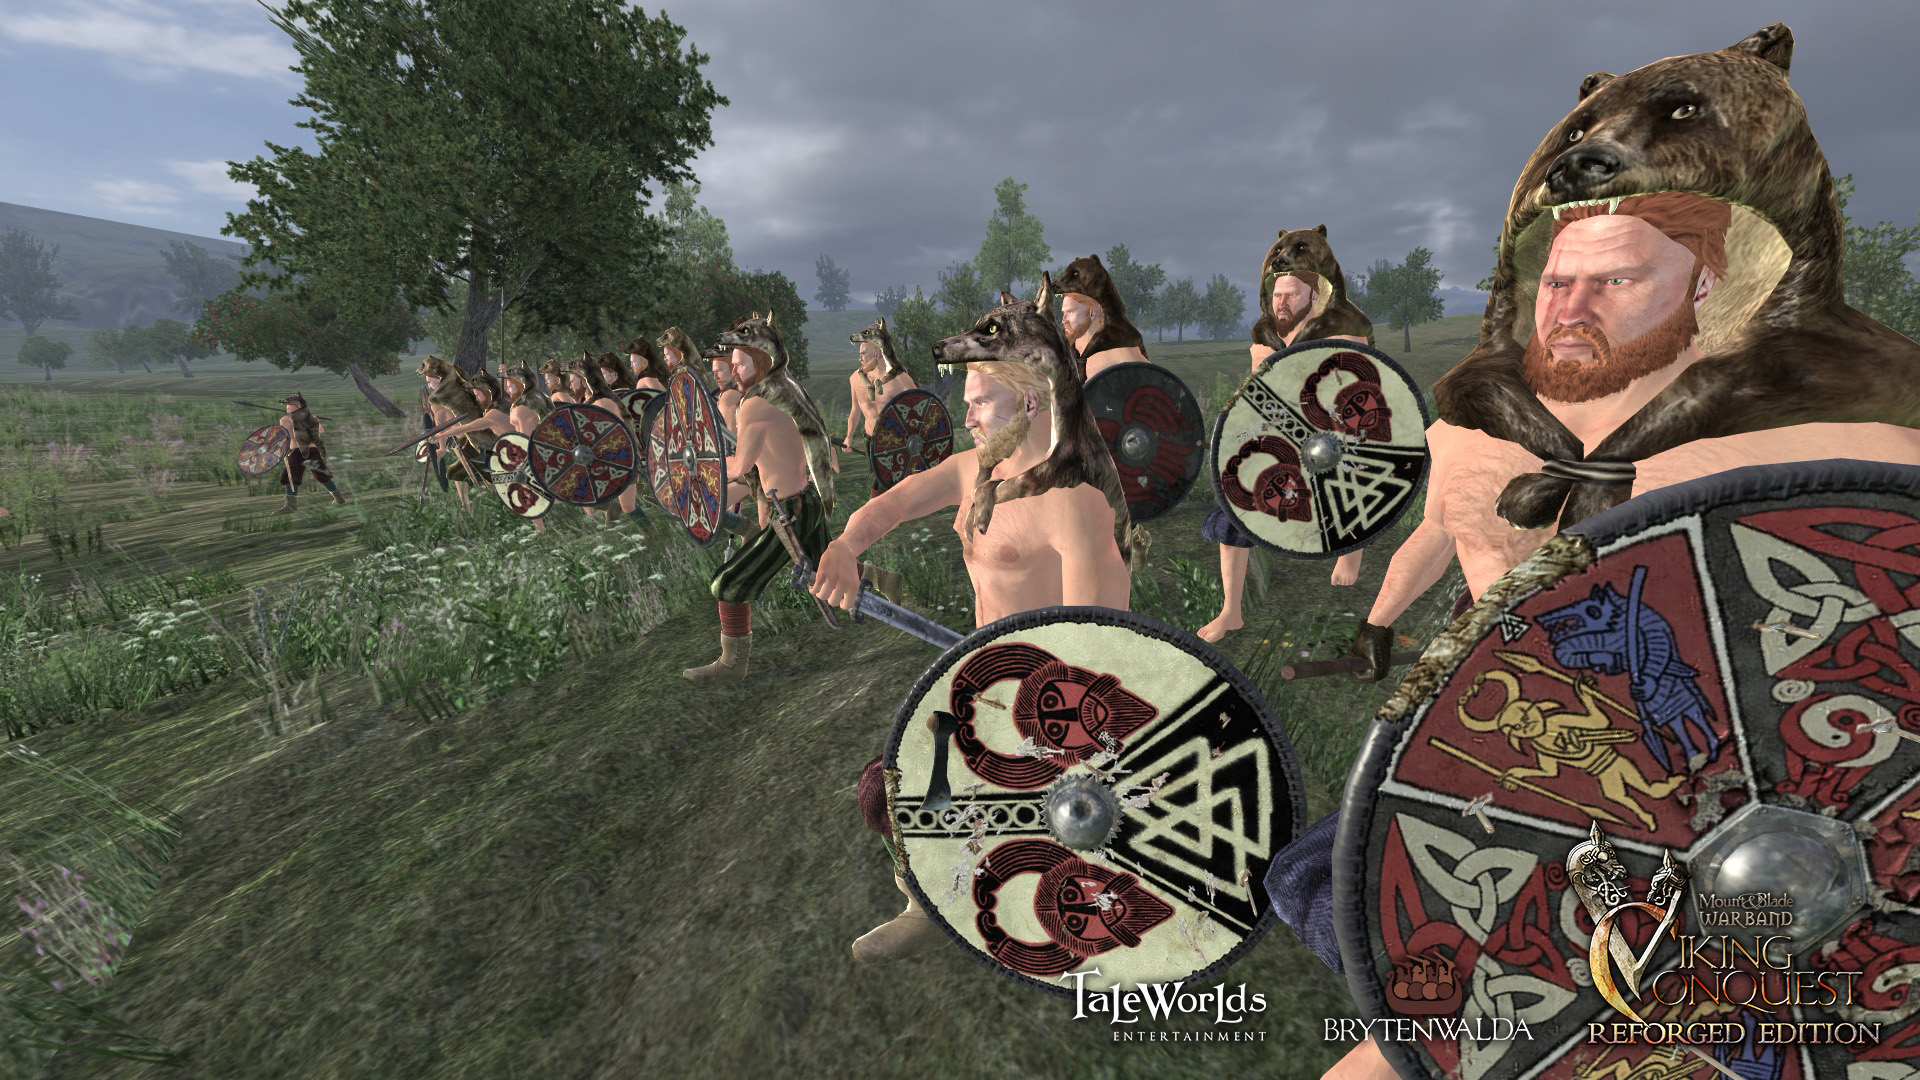 Mount & Blade: Warband - Viking Conquest Reforged Edition Images.